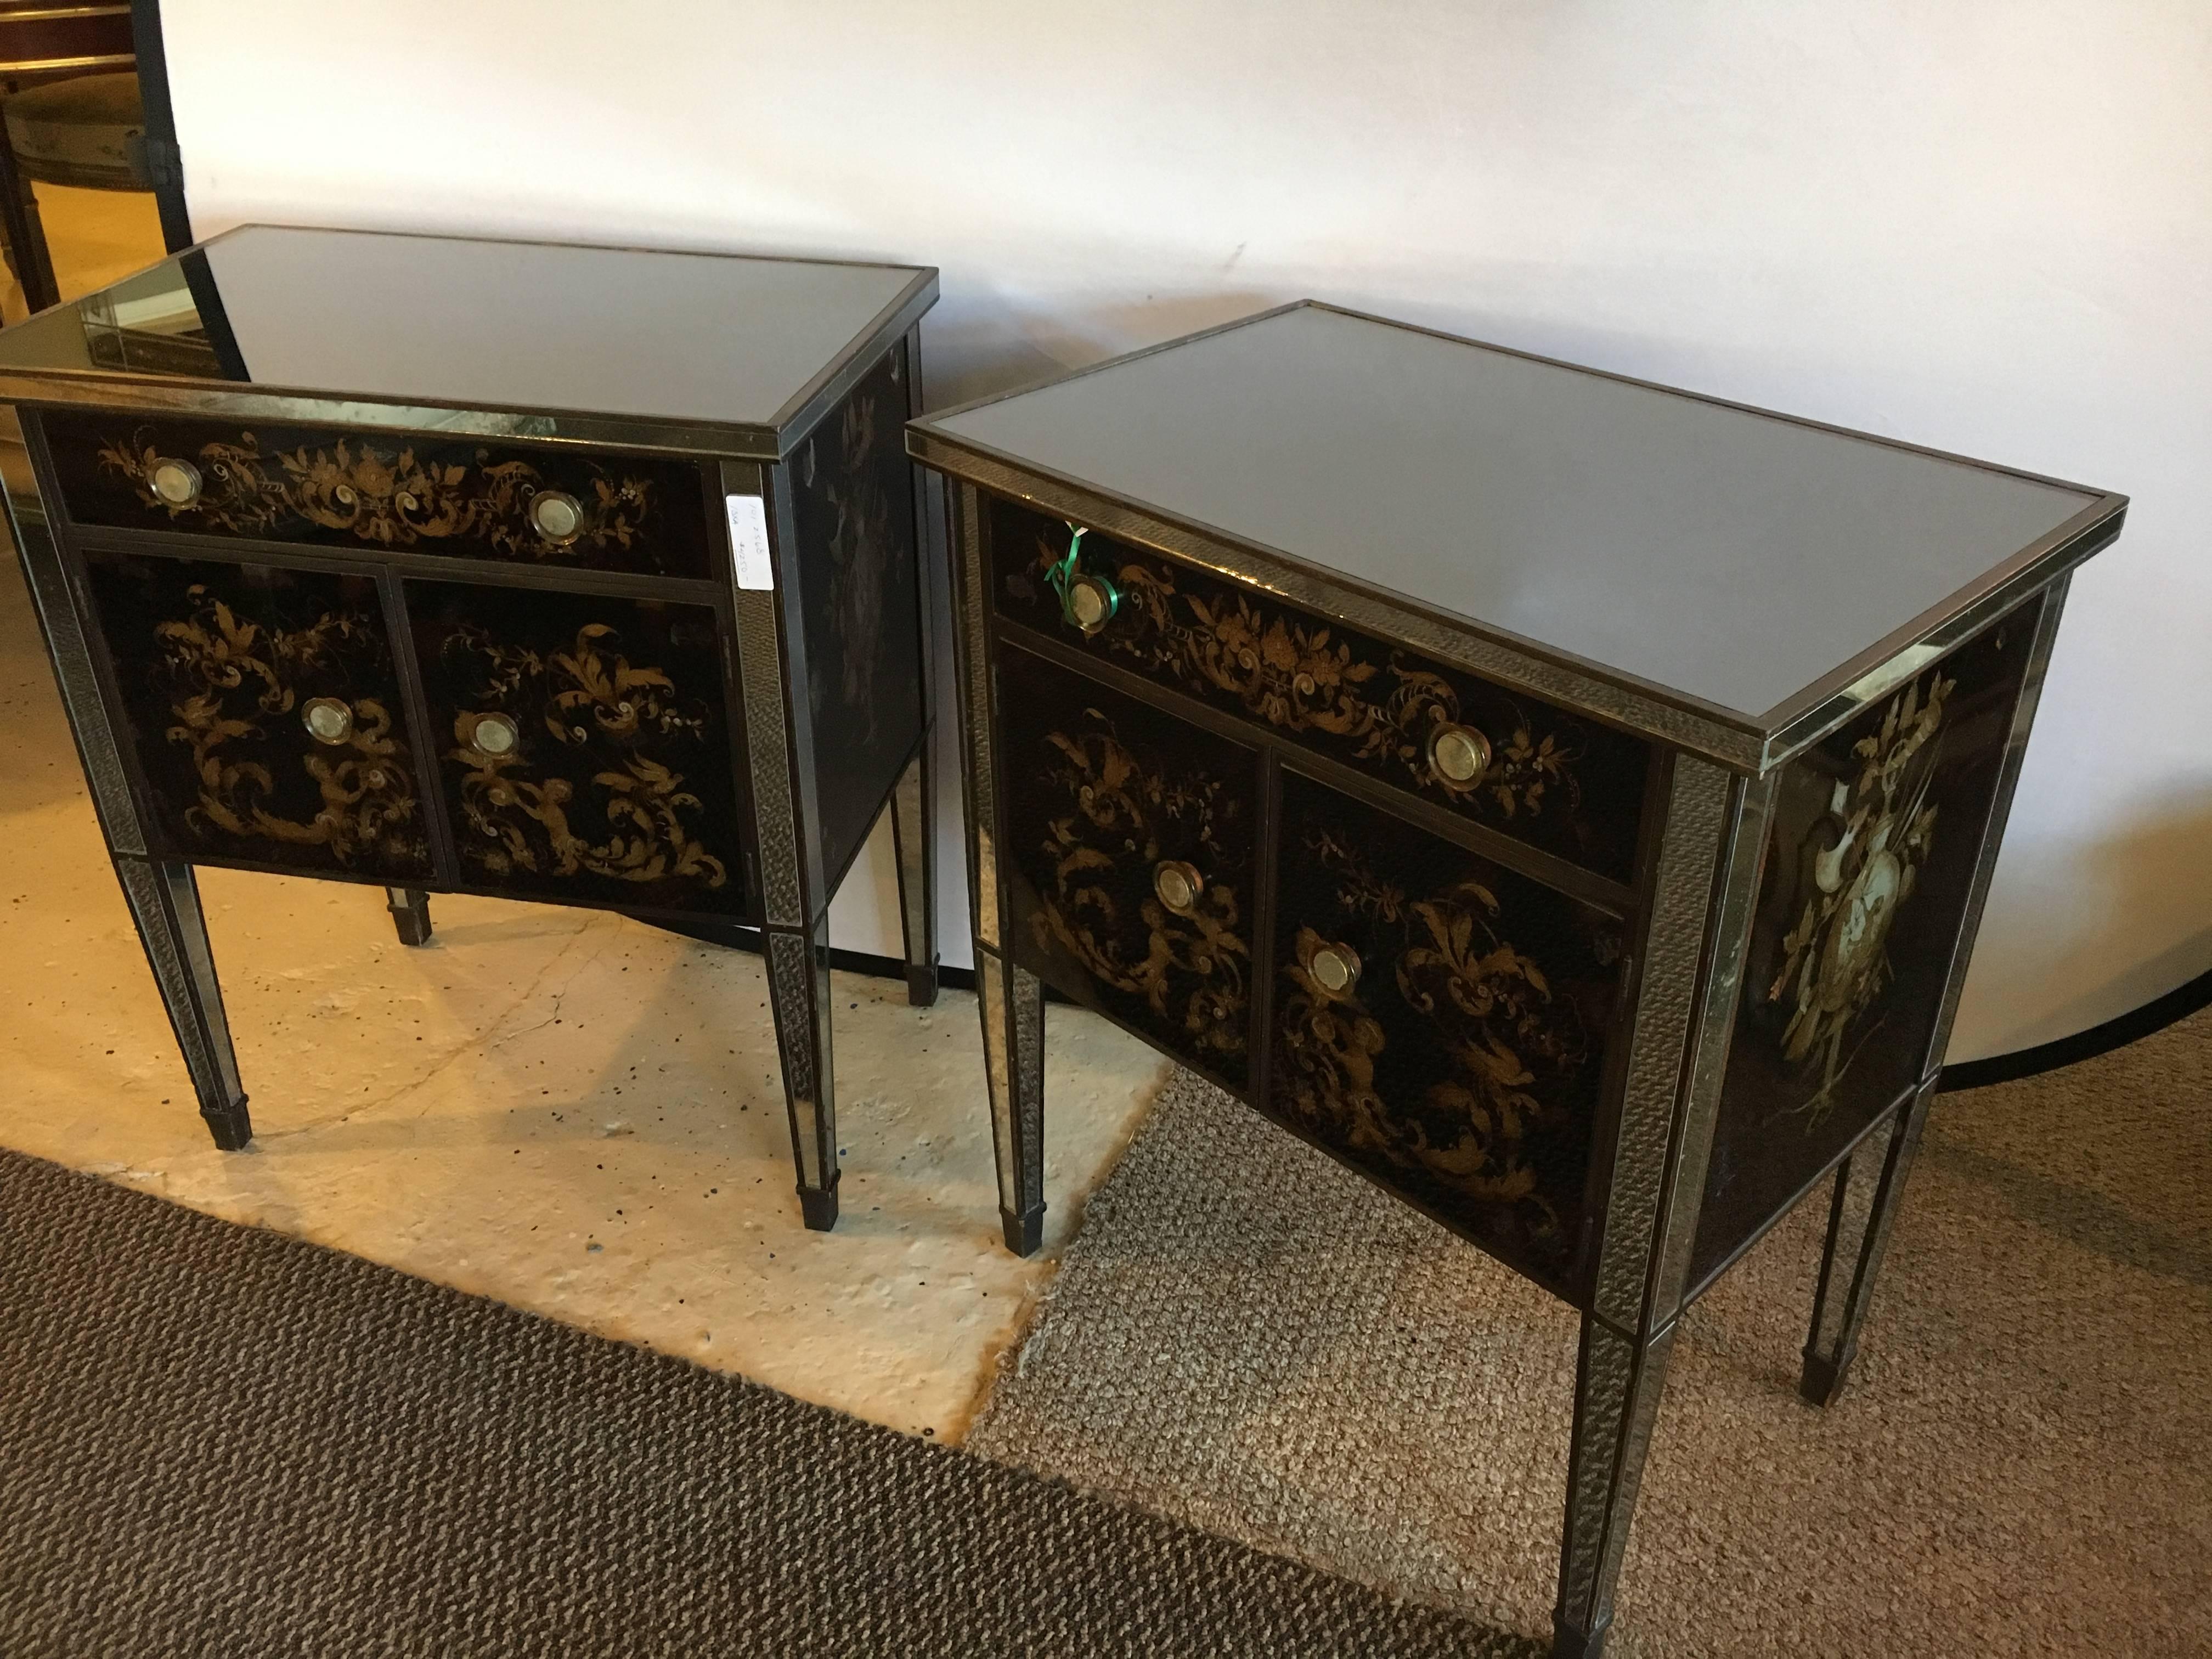 Pair of Jansen mirror and églomisé nightstands or end tables. A pair of wooden vintage case with later decorated mirrored and églomisé decorated panels. The tapering legs supporting a pair of door under a single drawer. Each distress decorated. One